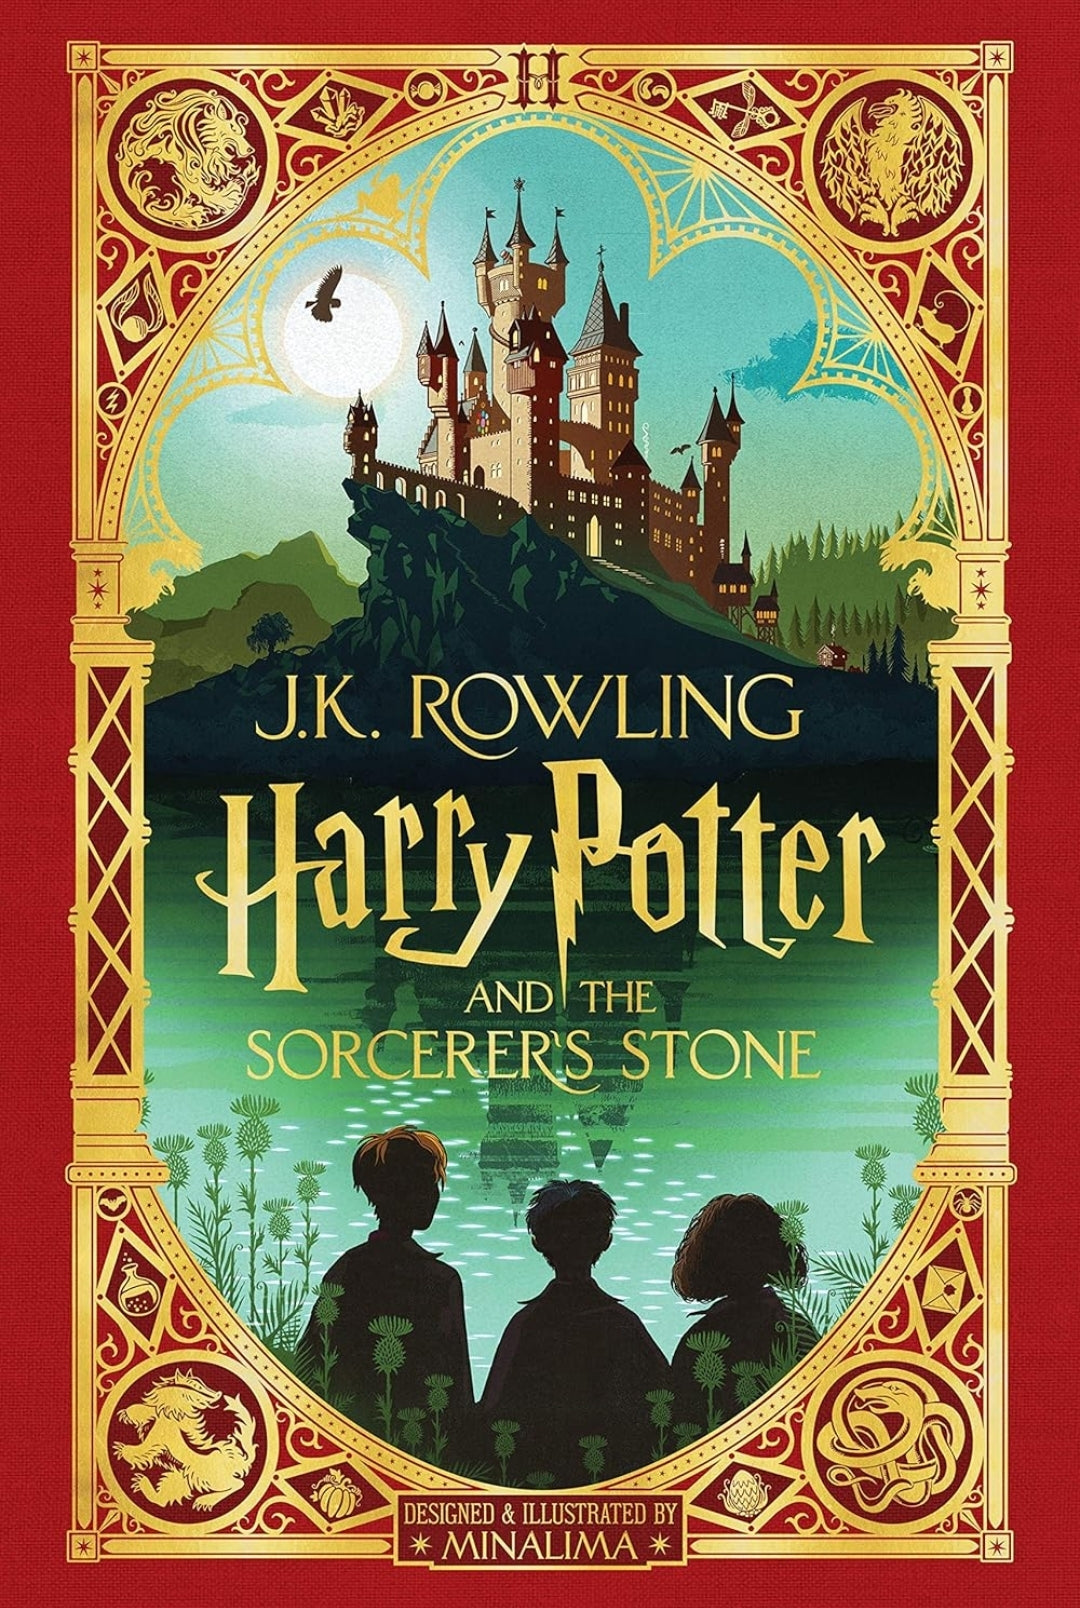 Harry Potter and the Sorcerer's Stone (Harry Potter, Book 1) (MinaLima Edition) (1)